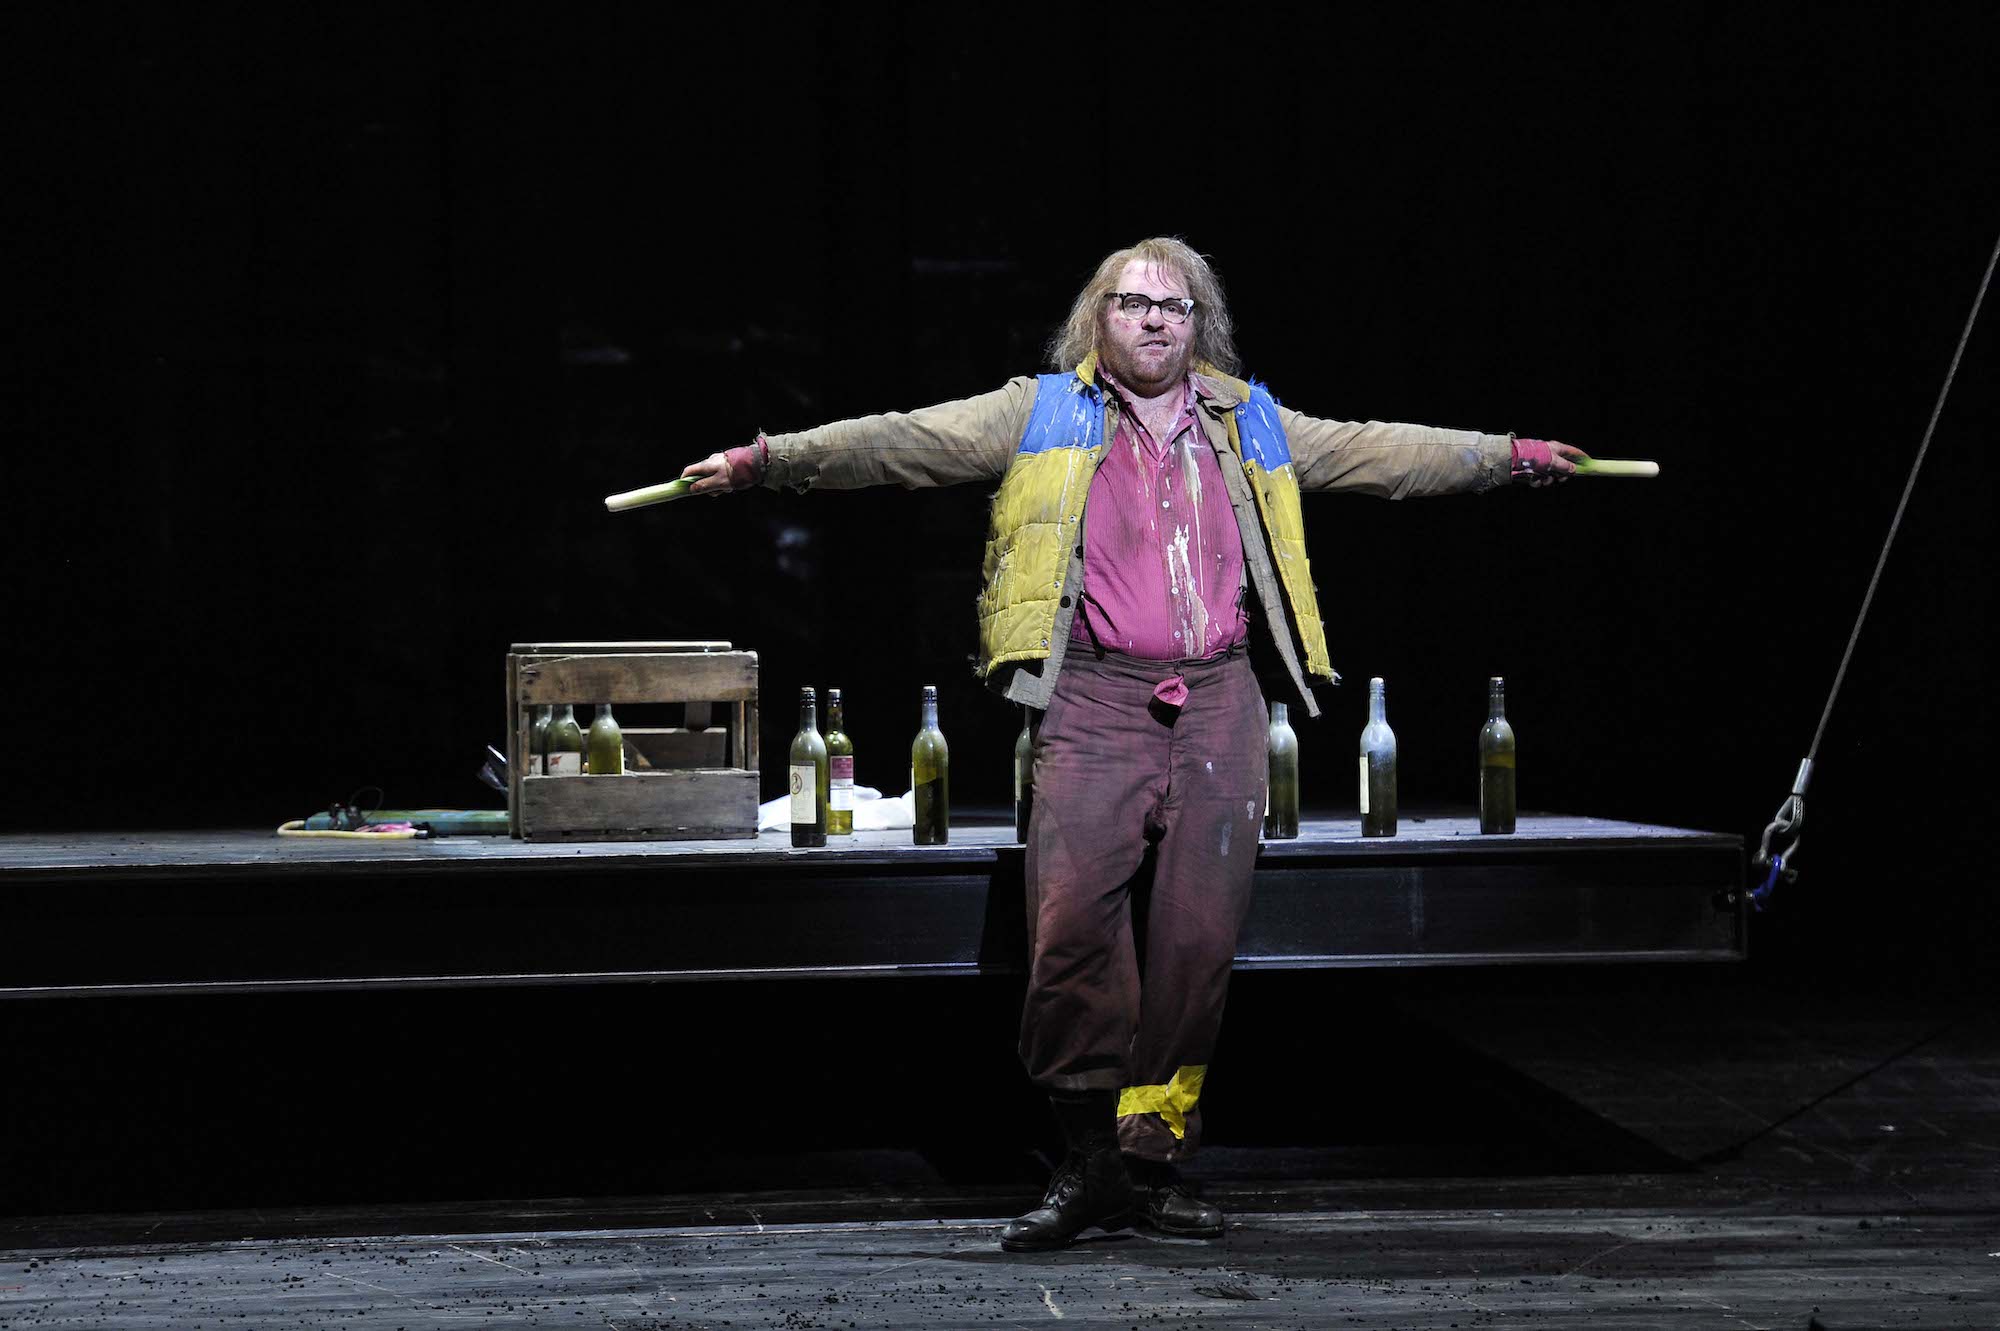 An actor in patched up and pain-splattered clothing makes a comic speech, while being surrounded by empty wine bottles